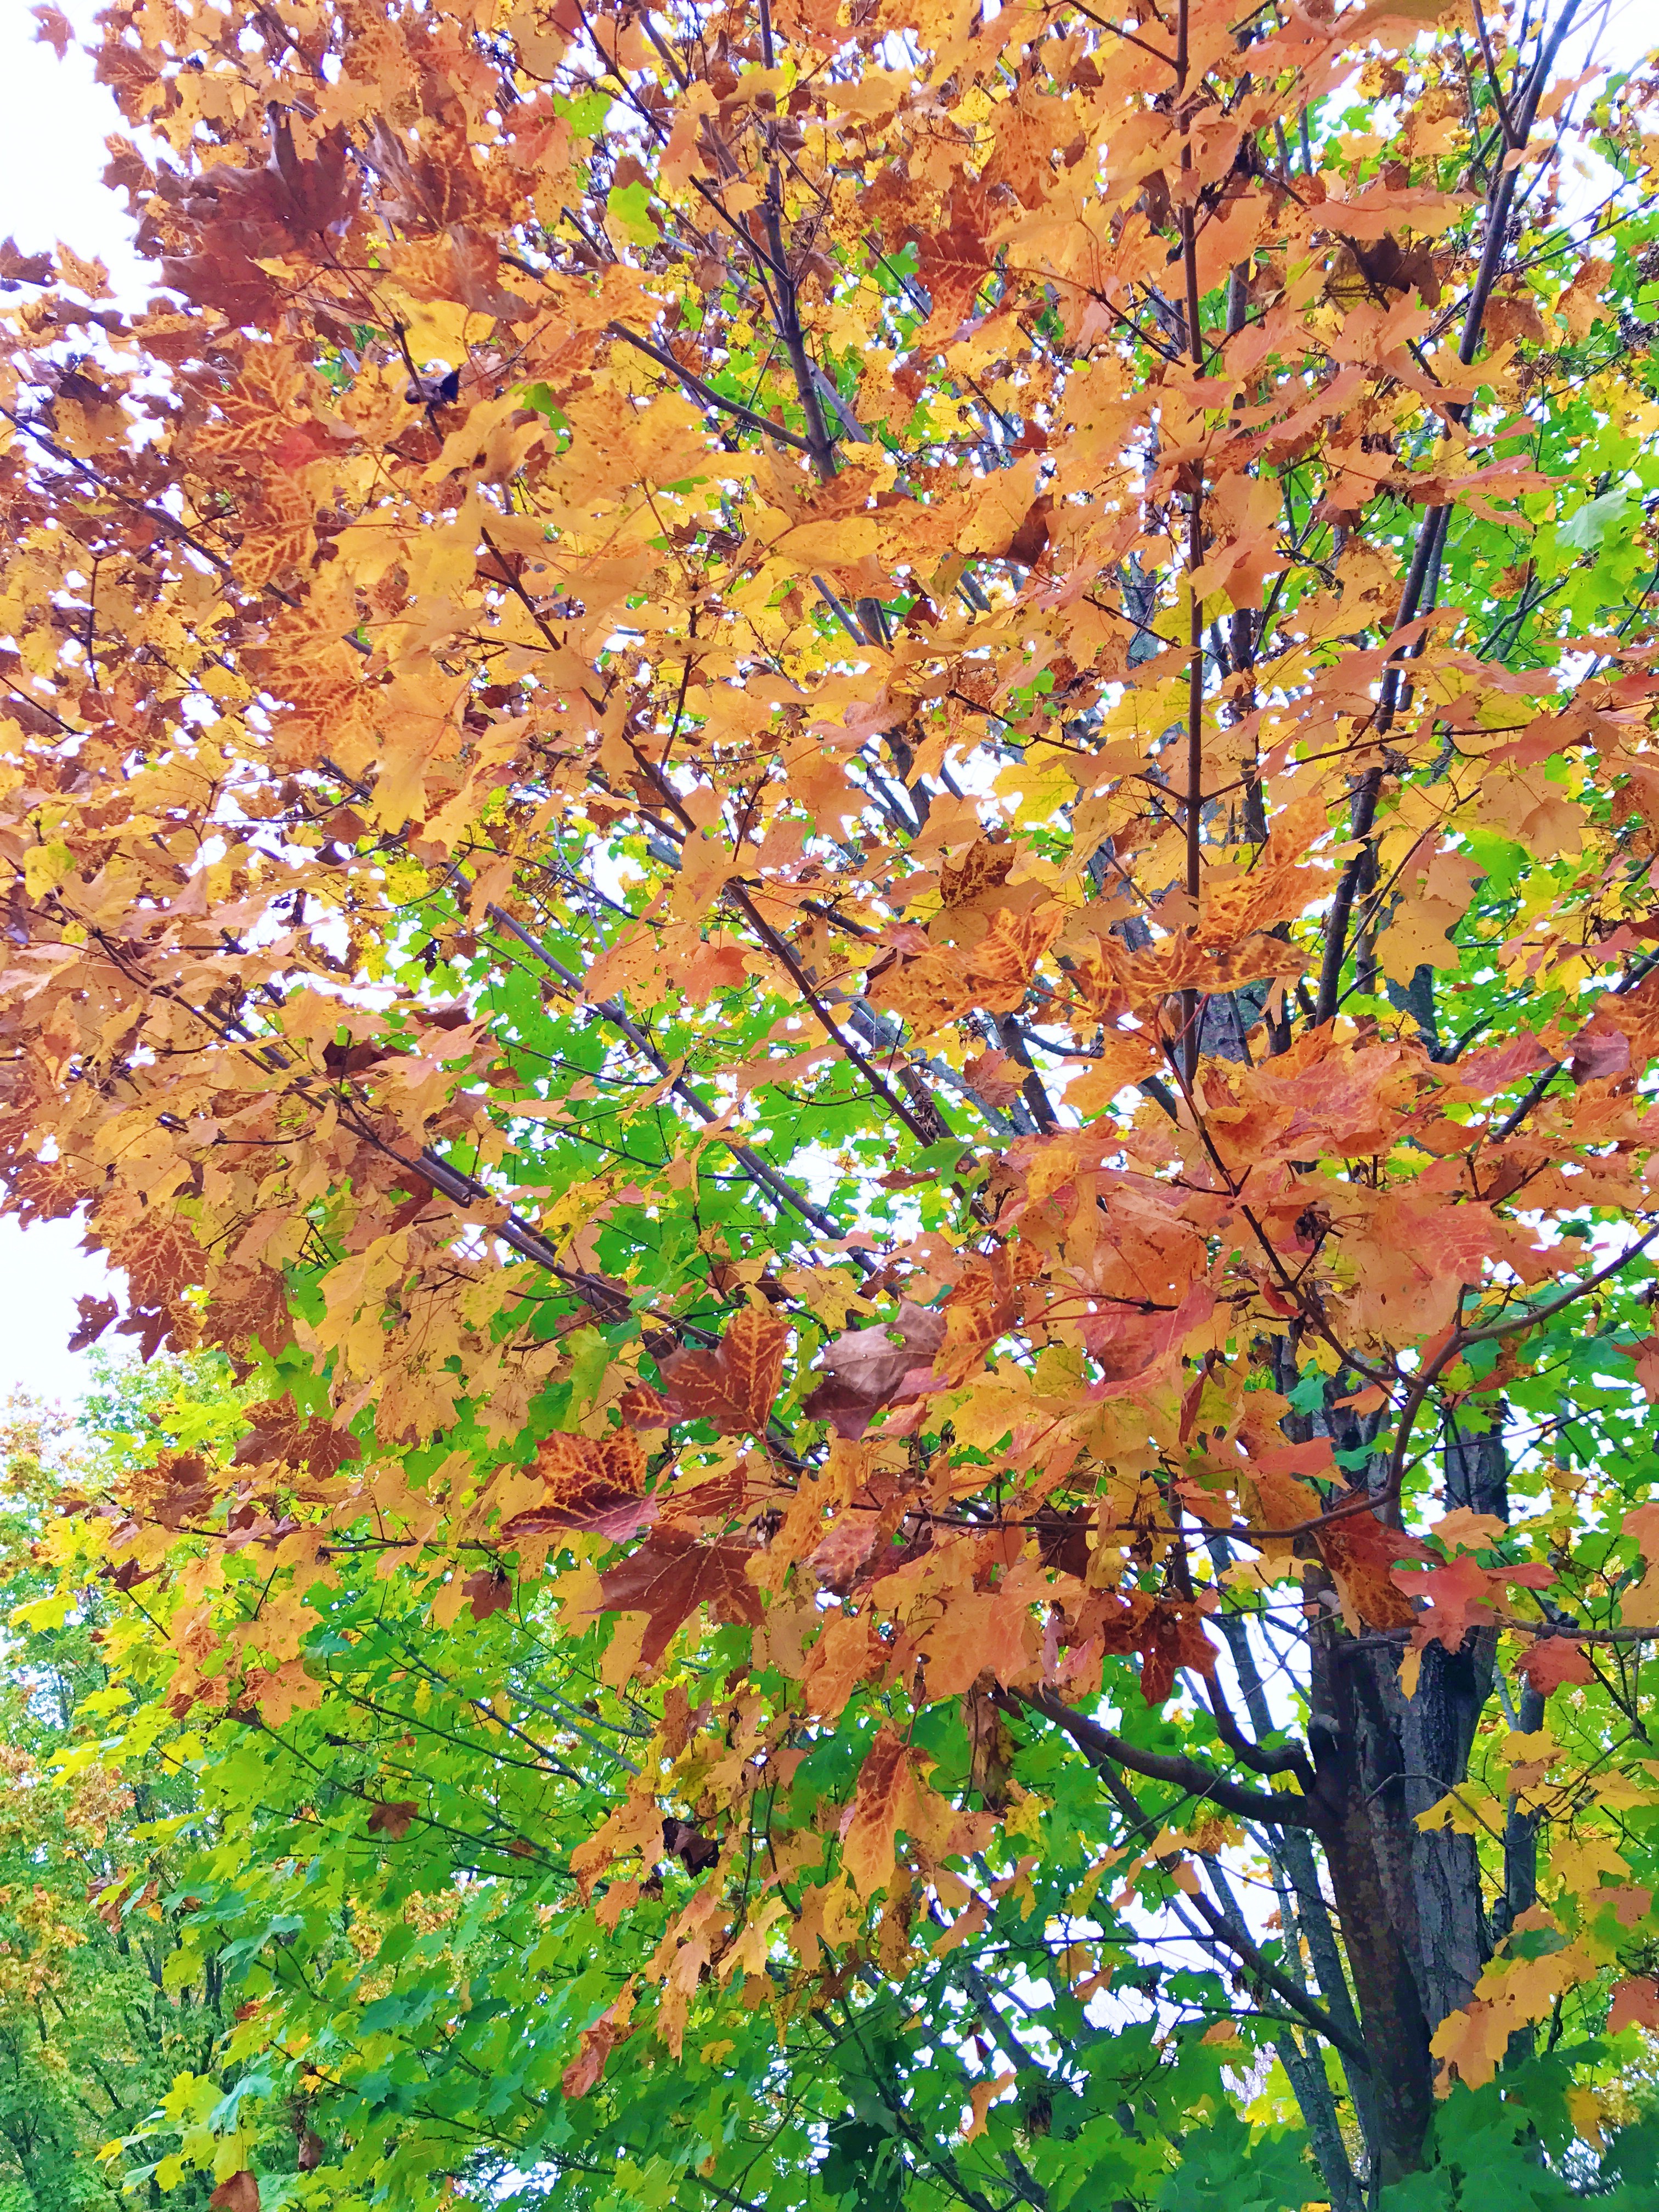 Fall Leaves - Fall Tree - Pennsylvania in the fall - Colorful leaves - Communikait by Kait Hanson